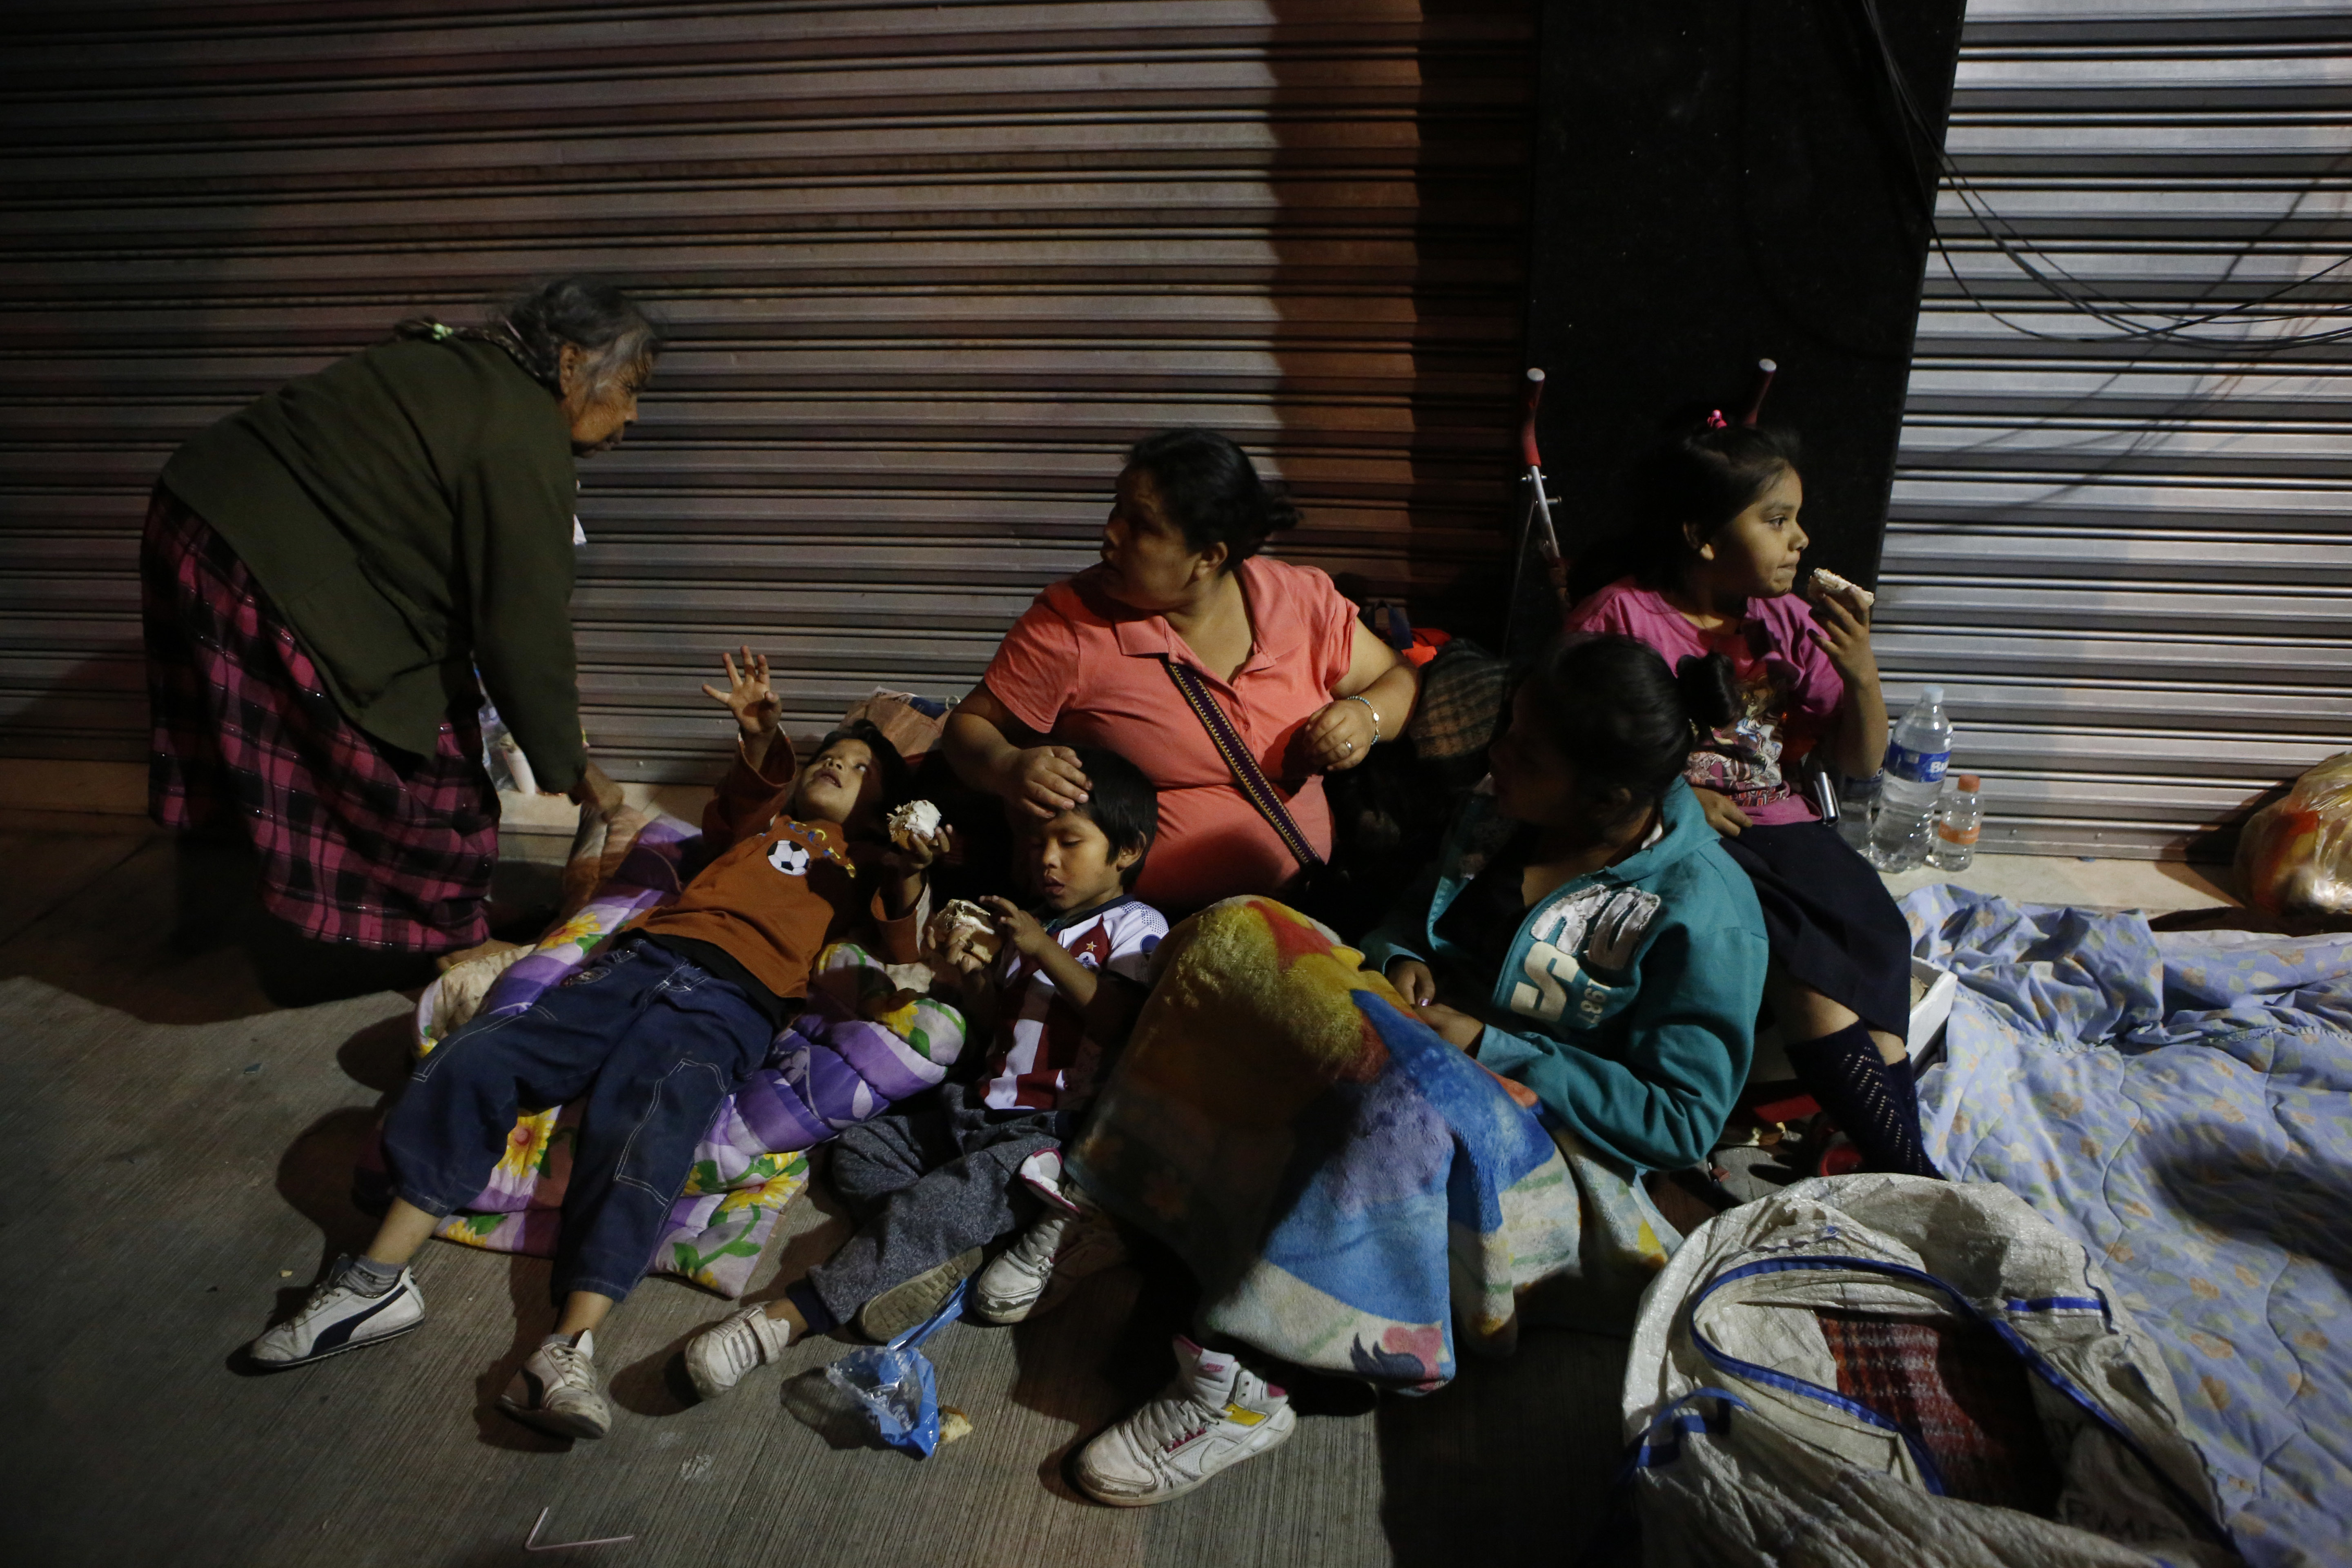 Families fearing aftershocks prepare to sleep on the street in the Roma neighborhood of Mexico City, Tuesday, Sept. 19, 2017. A magnitude 7.1 earthquake has stunned central Mexico, killing more than 100 people as buildings collapsed in plumes of dust. Thousands fled into the streets in panic, and many stayed to help rescue those trapped. (AP Photo/Rebecca Blackwell)